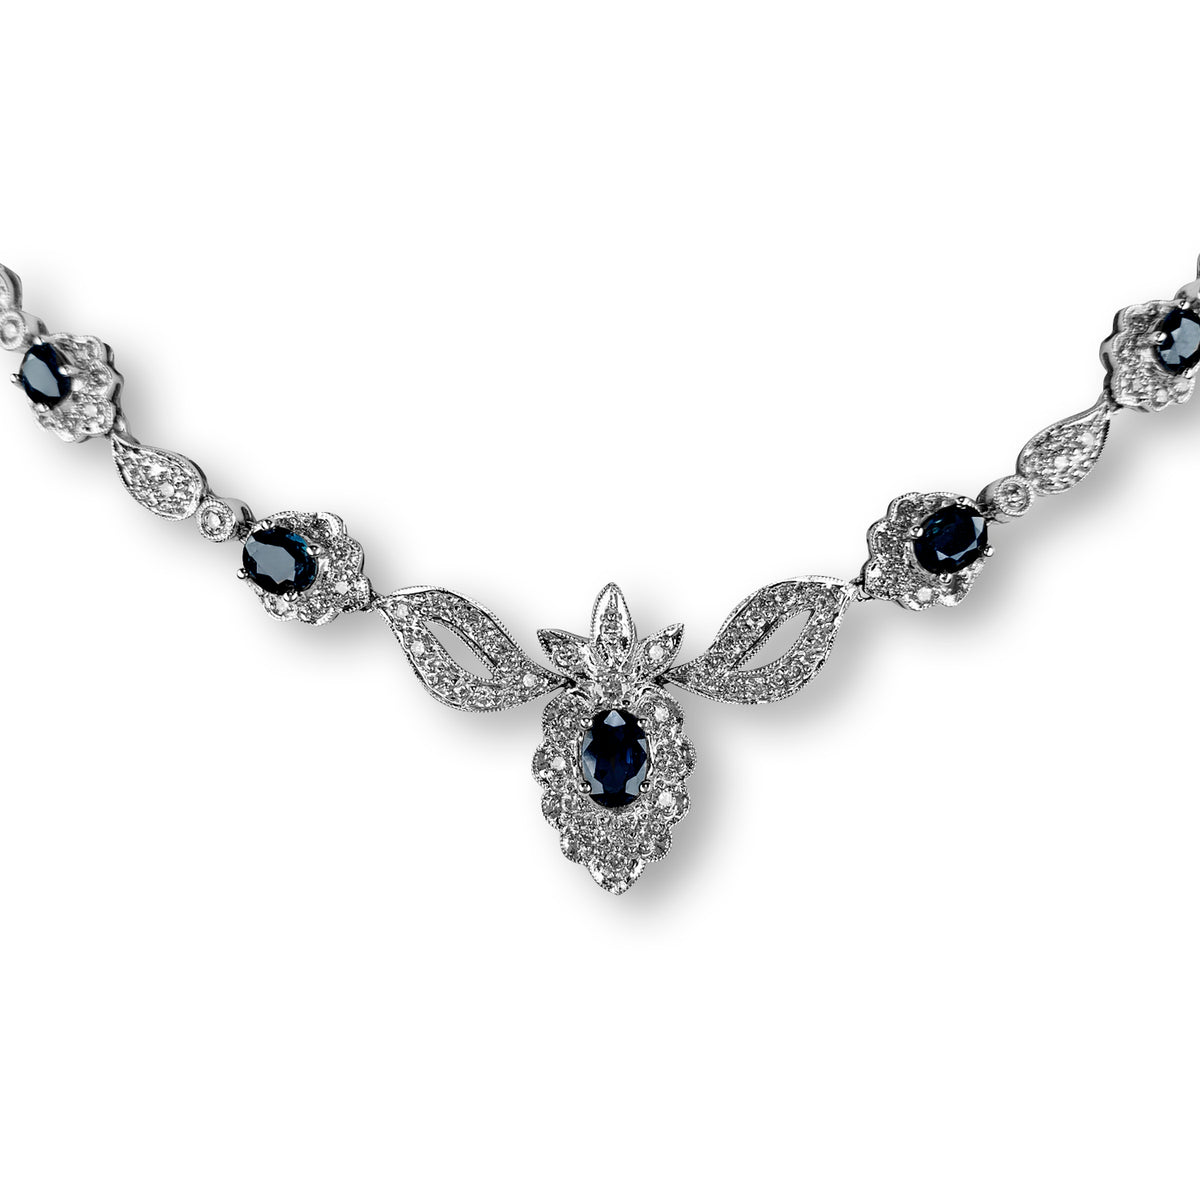 Blue Sapphire and Diamond Necklace, 18KT White Gold